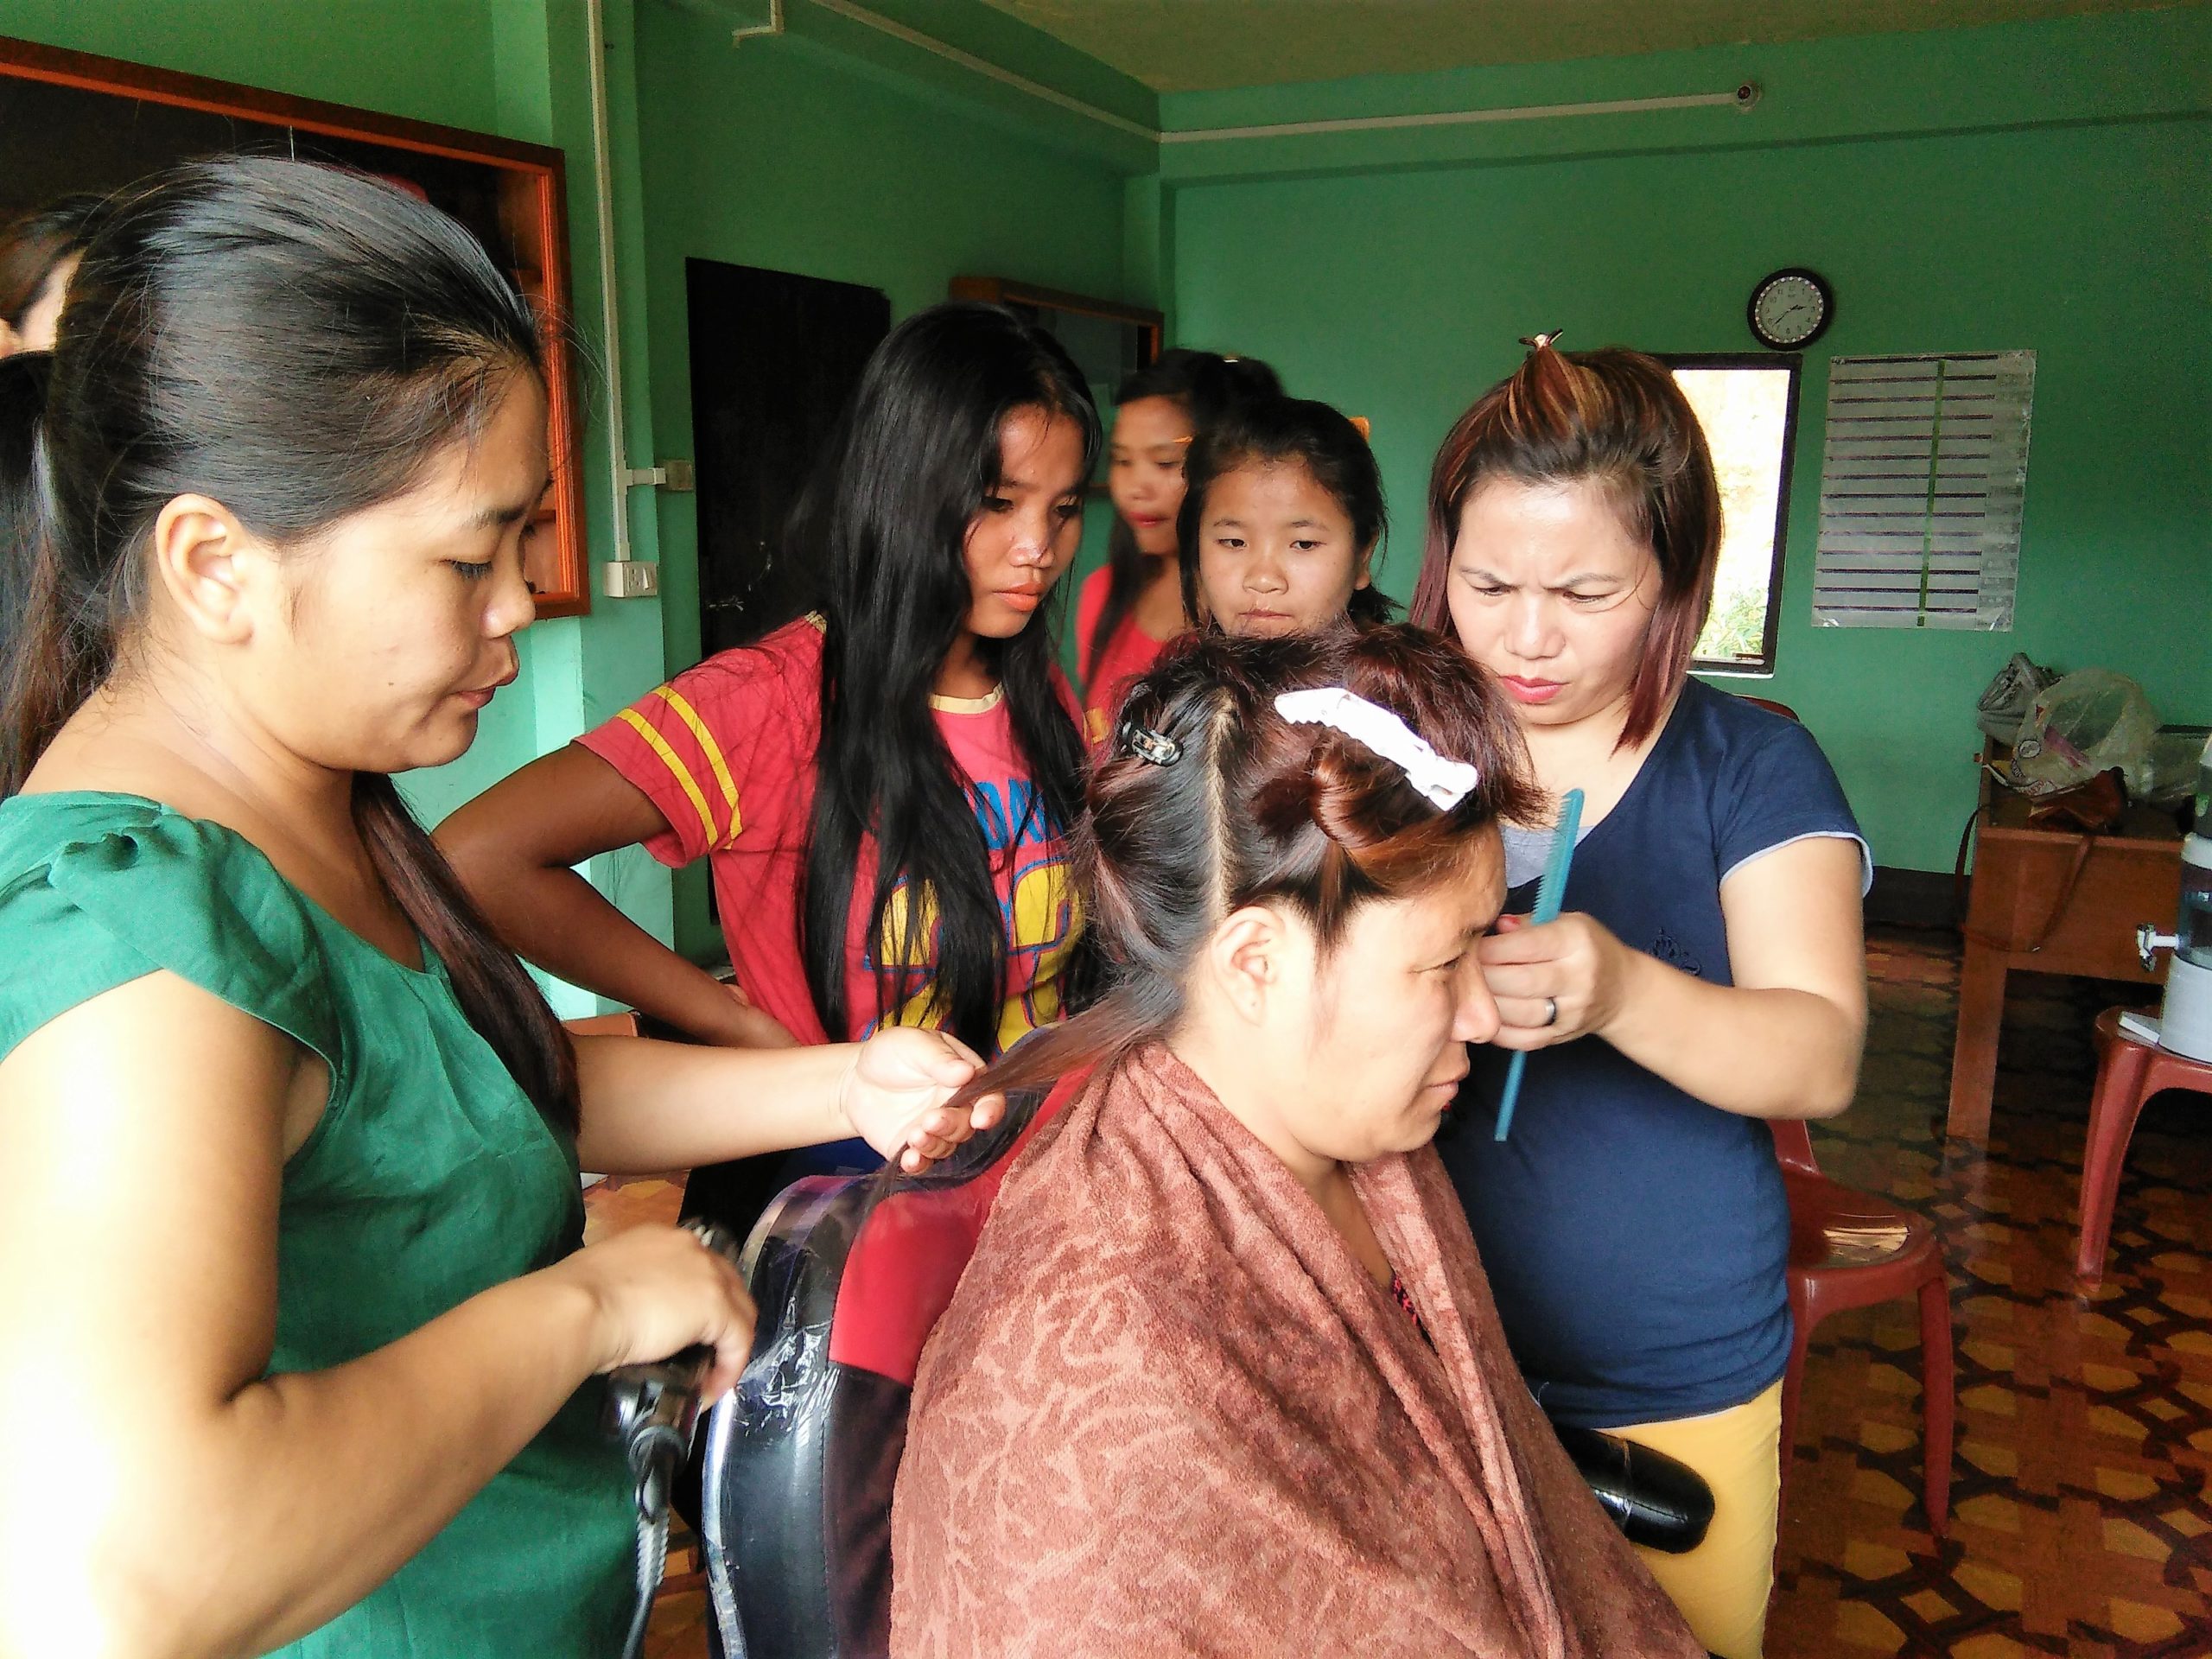 Tribal women in Manipur make a living as beauticians with help from RYTHM funded Social Entrepreneur